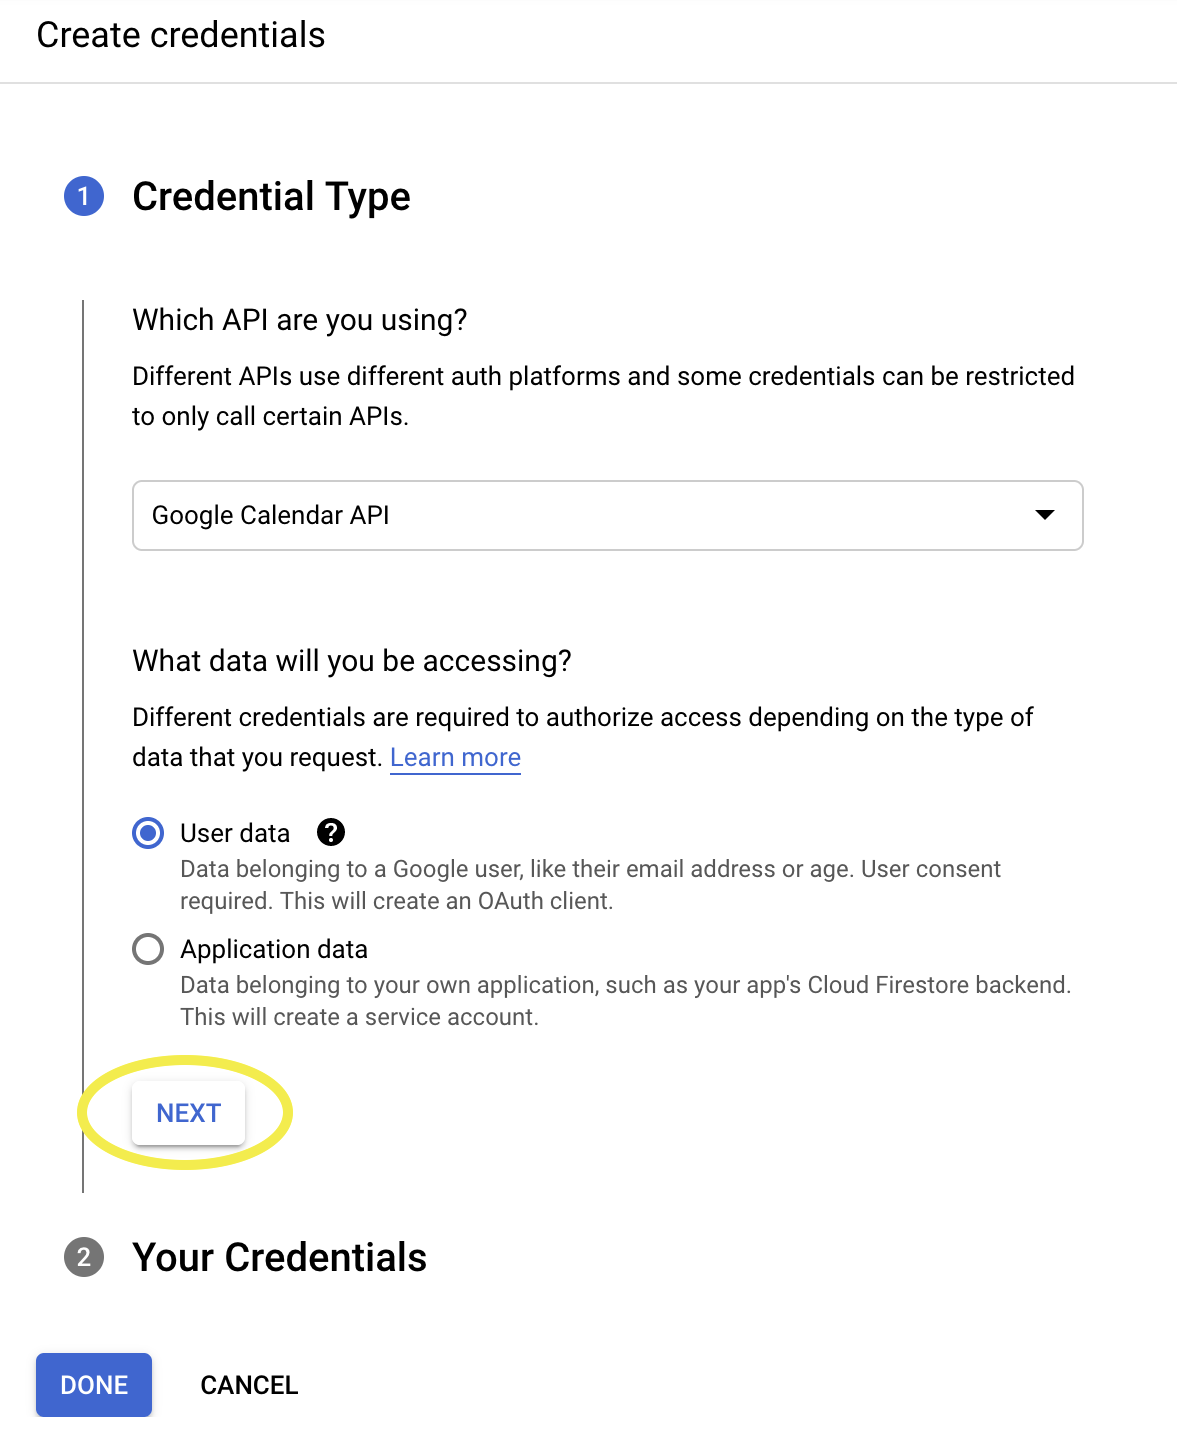 Credential Type screen, with "Google Calendar API" and "User data" selected. The "Next" button is circled in yellow.